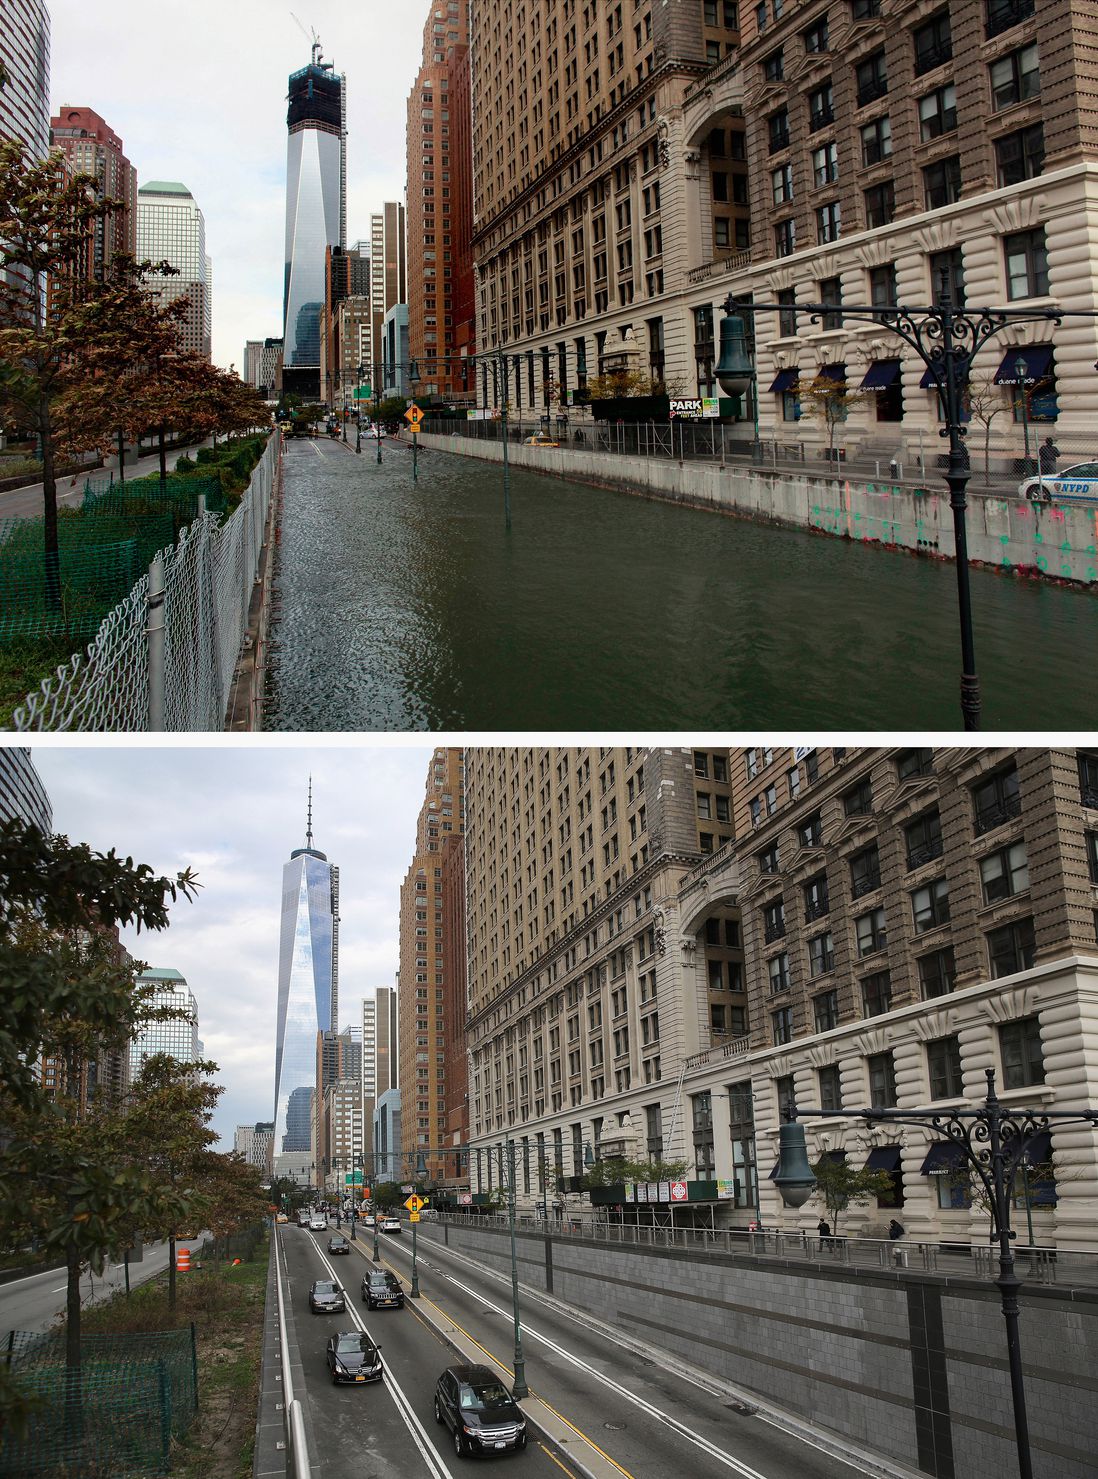 [Top] Hugh L. Carey Tunnel sits flooded after a tidal surge caused by Hurricane Sandy, on October 30, 2012 in New York City. [Bottom] Traffic passes from Manhattan into the Hugh L. Carey Tunnel on October 22, 2013 in New York City.